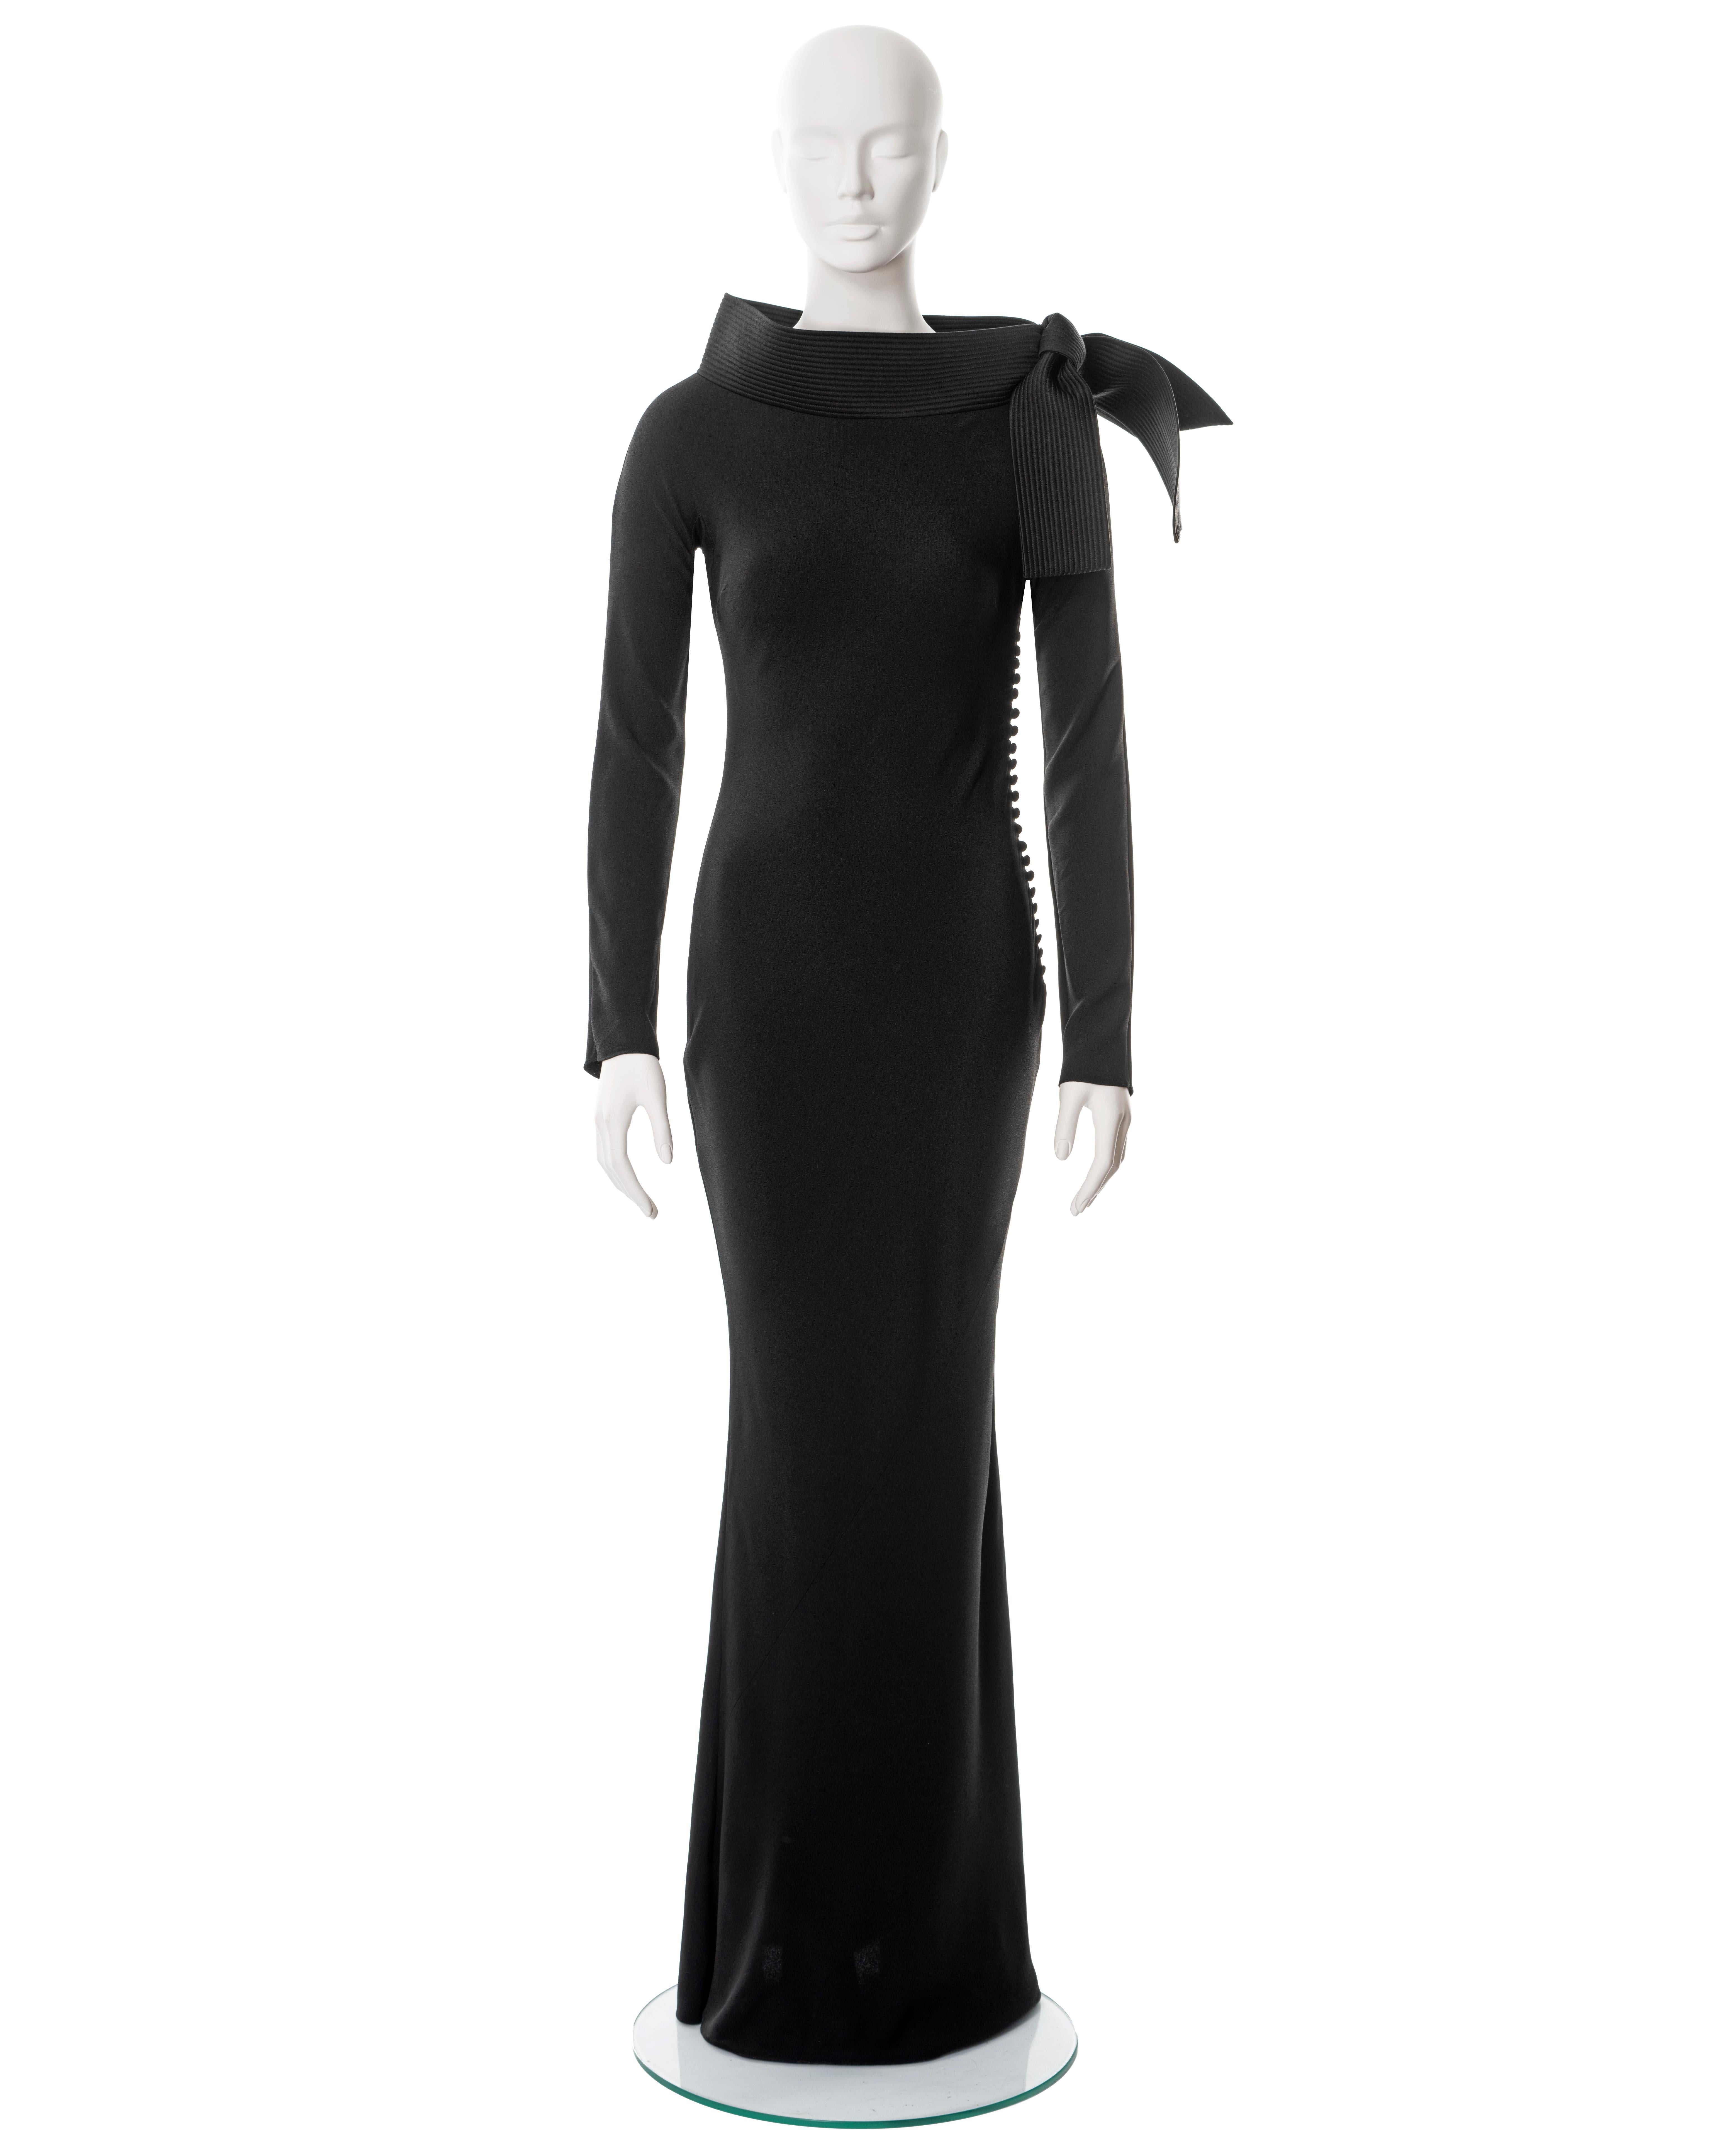 ▪ Christian Dior black evening dress 
▪ Designed by John Galliano
▪ Sold by One of a Kind Archive
▪ Fall-Winter 1999
▪ Constructed from black bias-cut satin-backed crêpe 
▪ Boat neck with standing collar and large bow to one shoulder 
▪ Long fitted